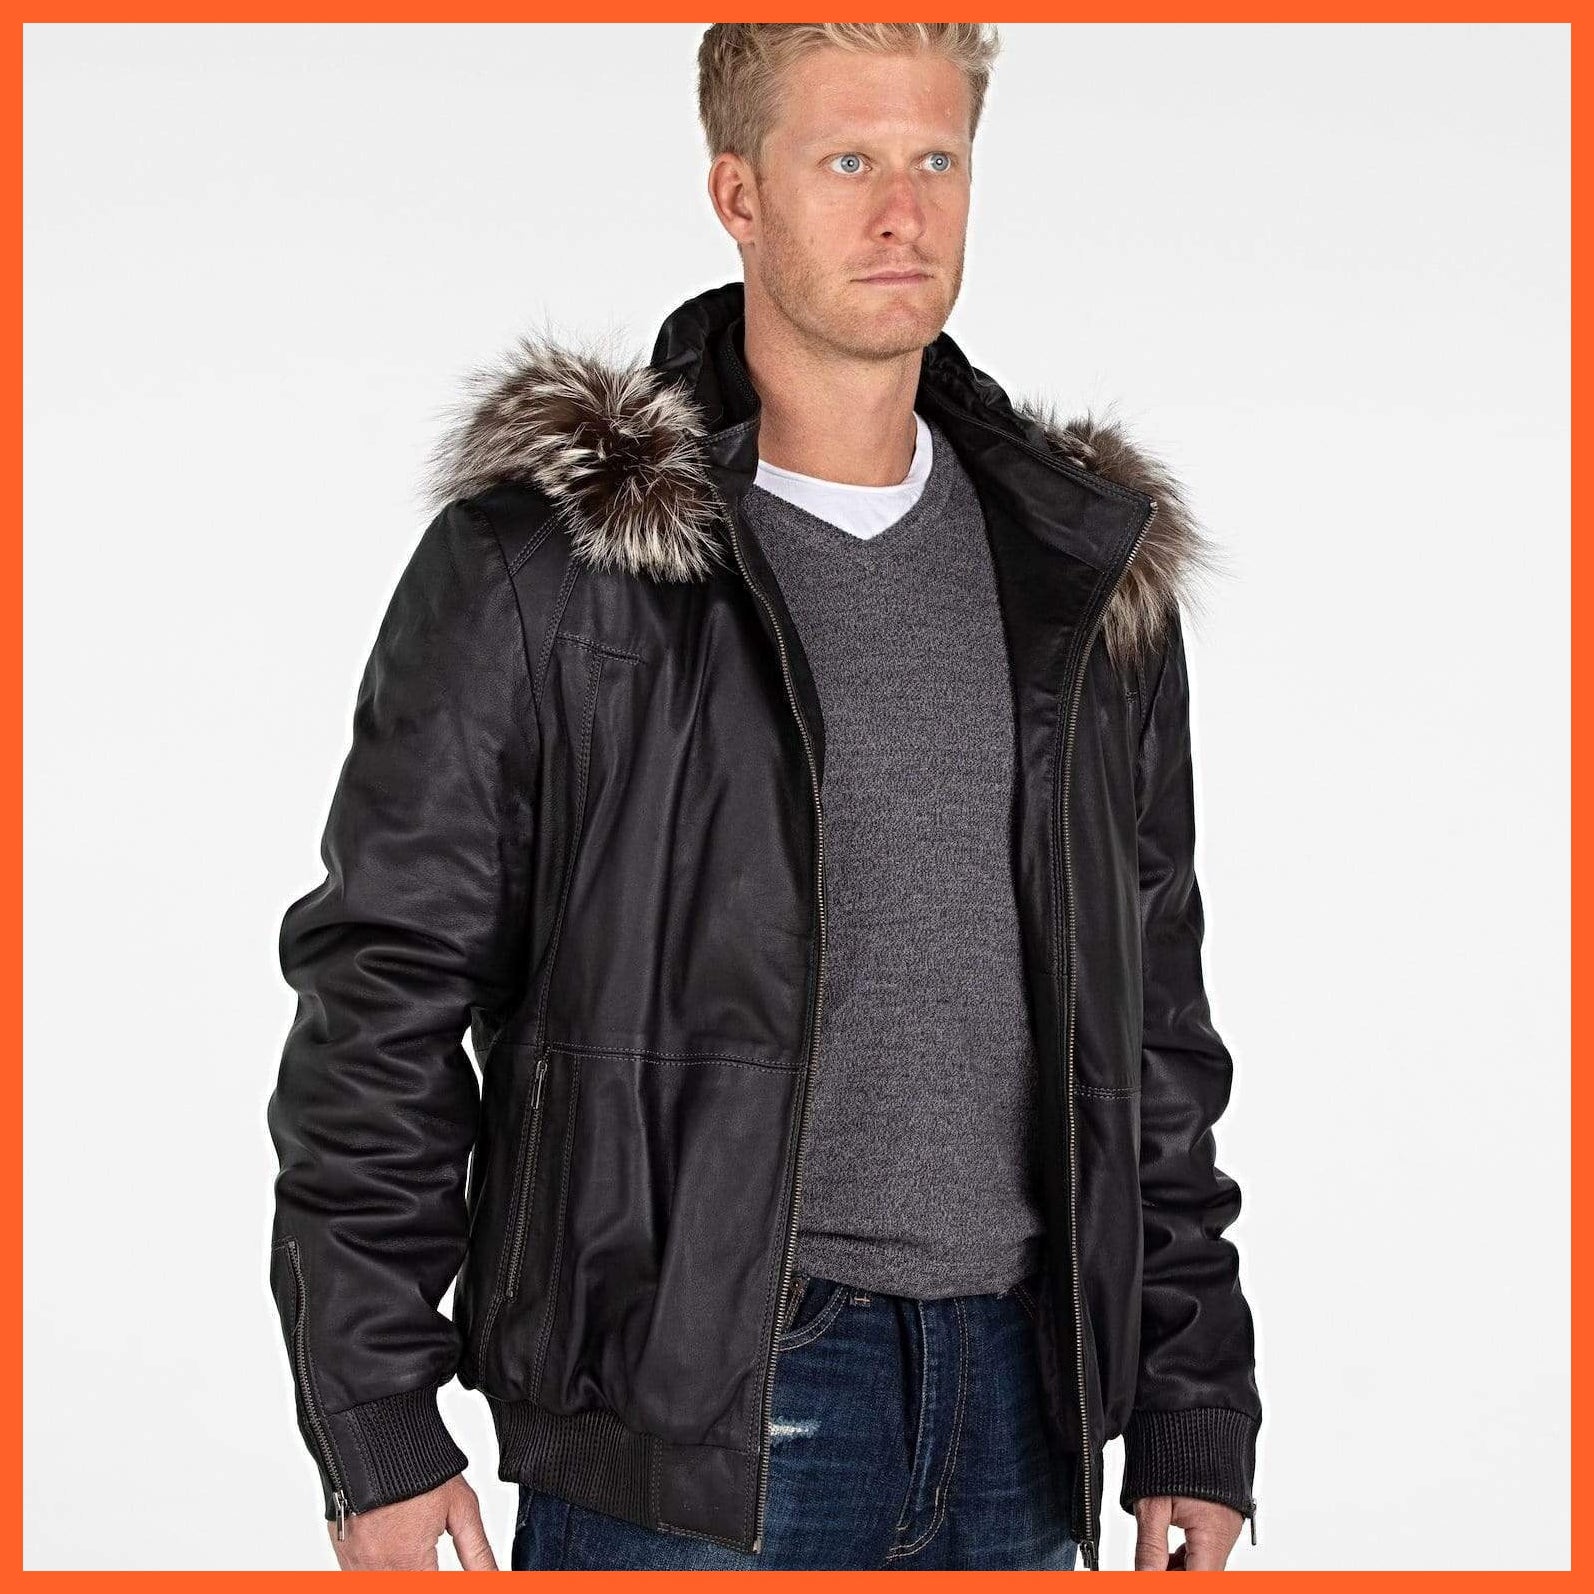 Mens Silver Fox Look Fur Hooded Leather Jacket - Clearance | whatagift.com.au.